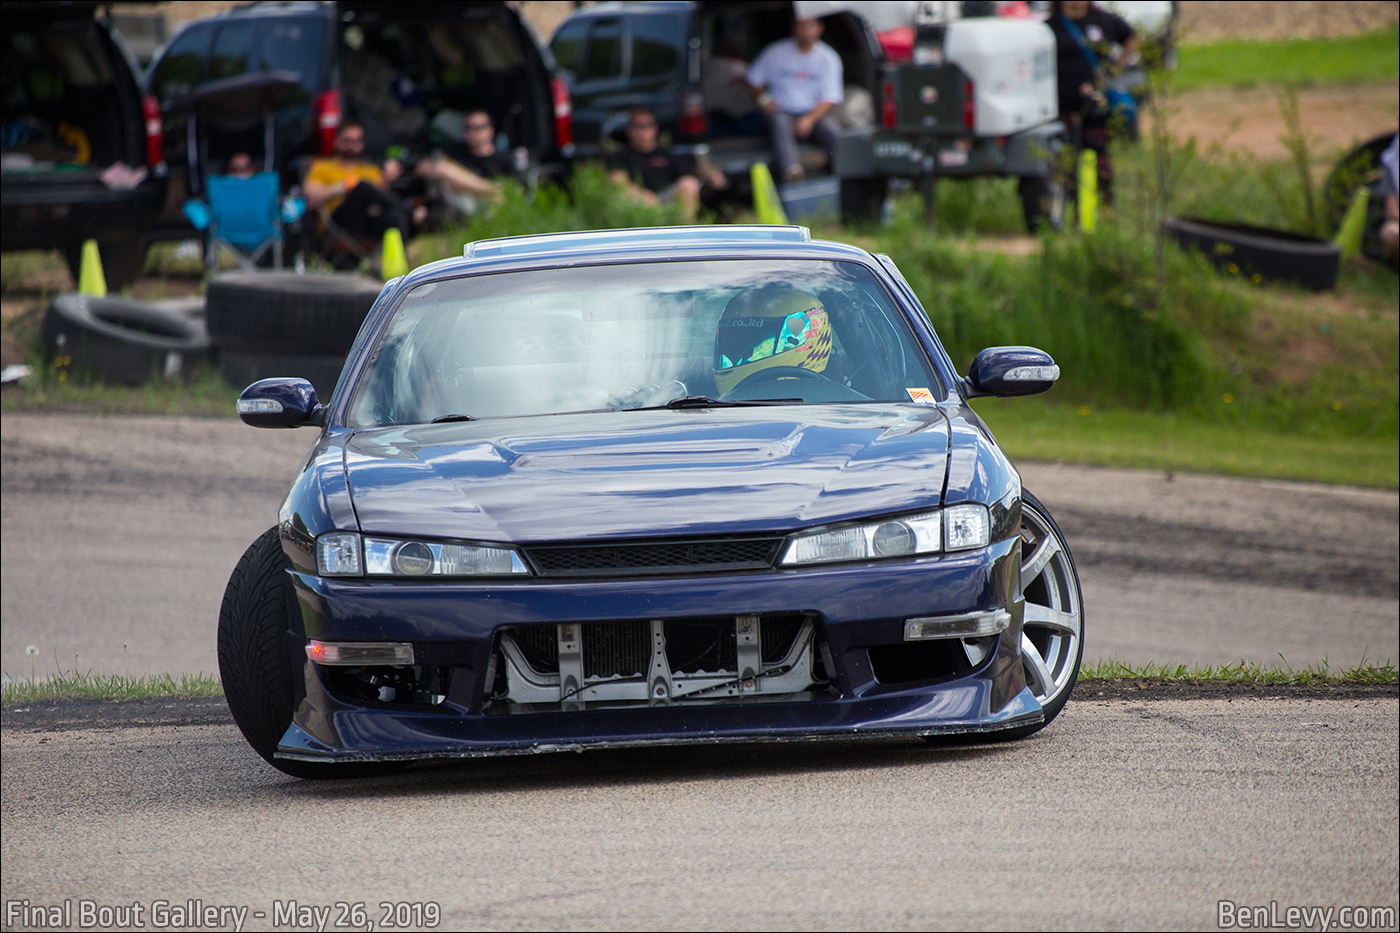 S14a Spinout on the track